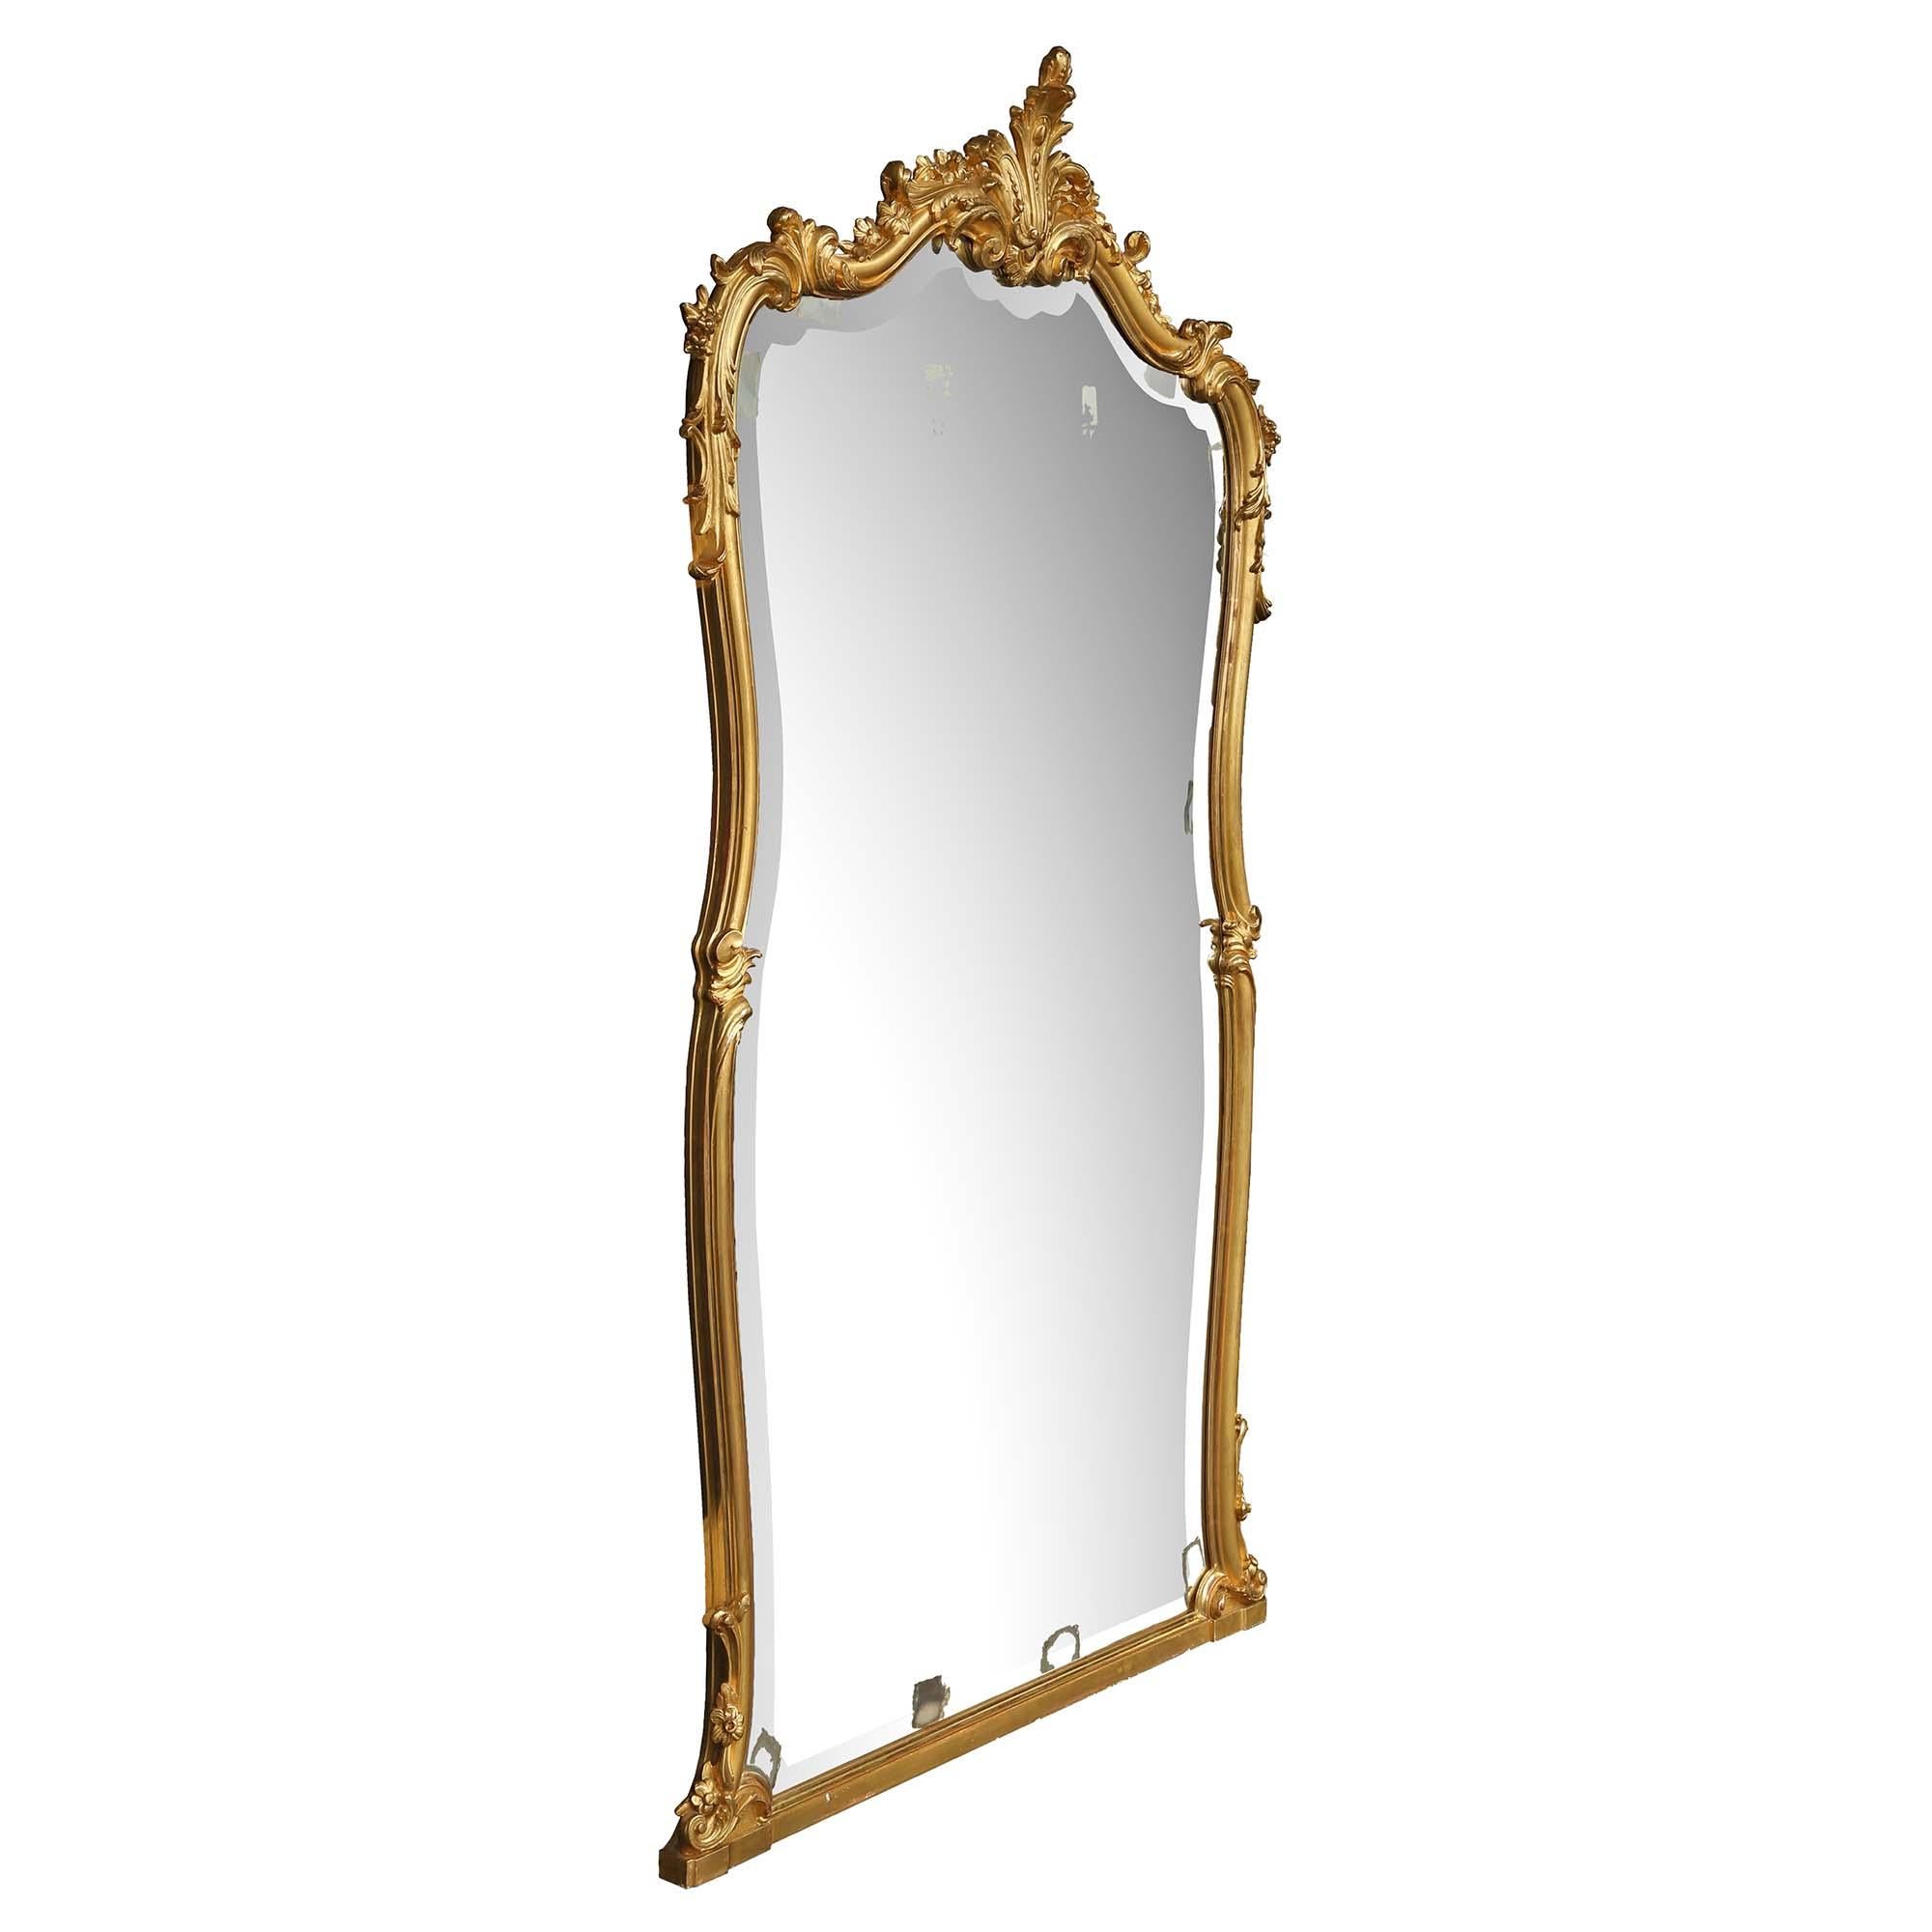 An elegant French 19th century Louis XV st. giltwood mirror. The original beveled mirror plate is framed within an extremely decorative scrolled moulded giltwood border. At the border are floral carvings and a straight bottom support. The rich top